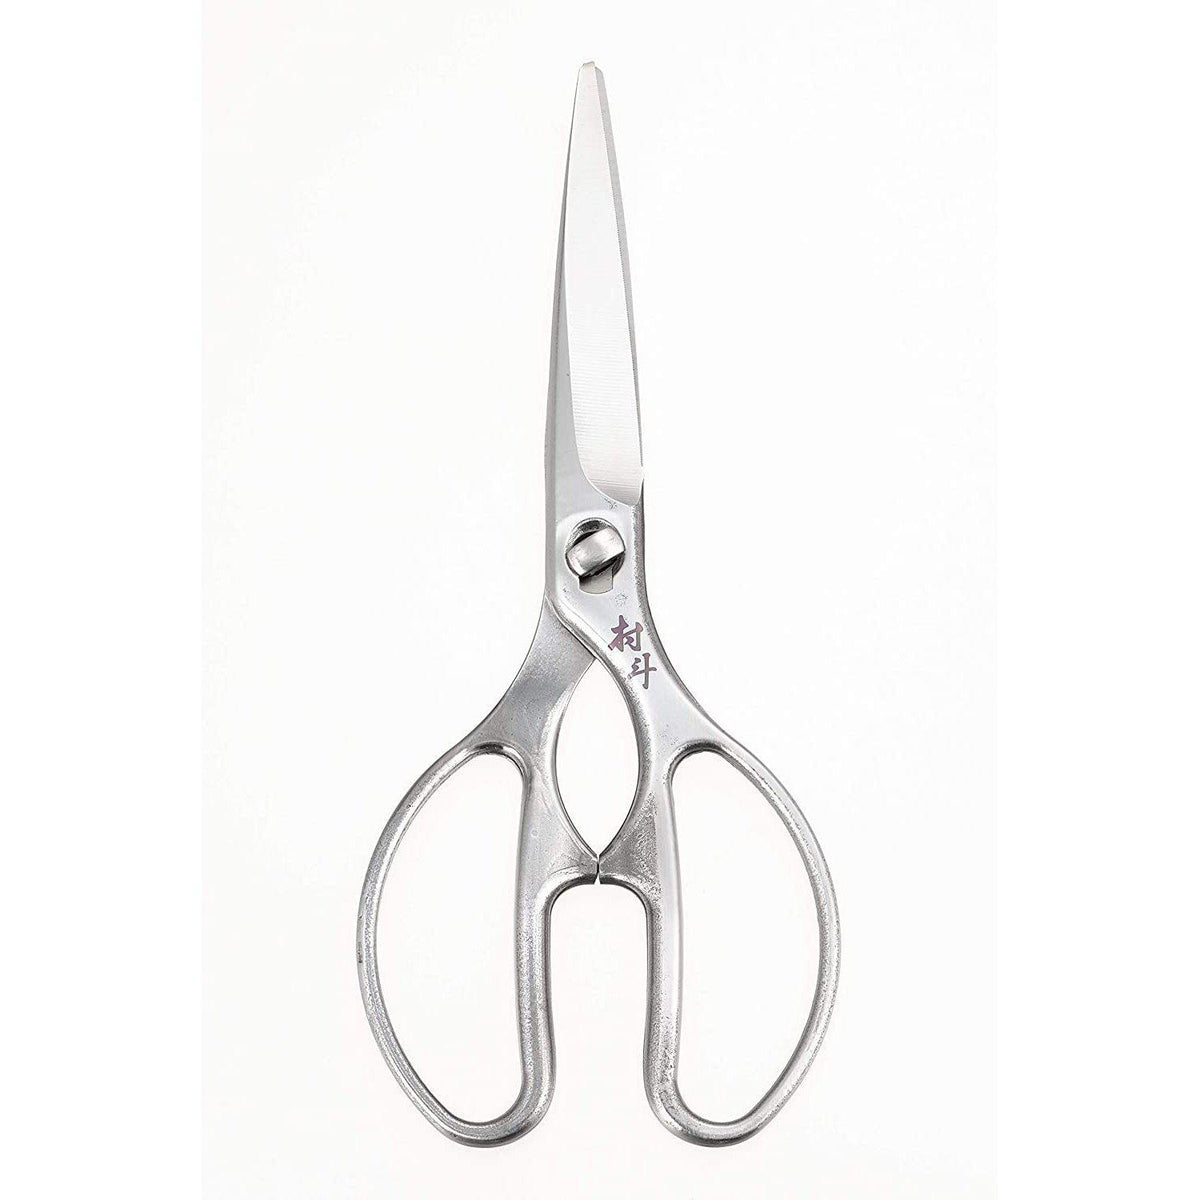 STRONG ALL STEEL, RED KITCHEN SCISSORS, EASILY DISMANTLED FOR CLEANING